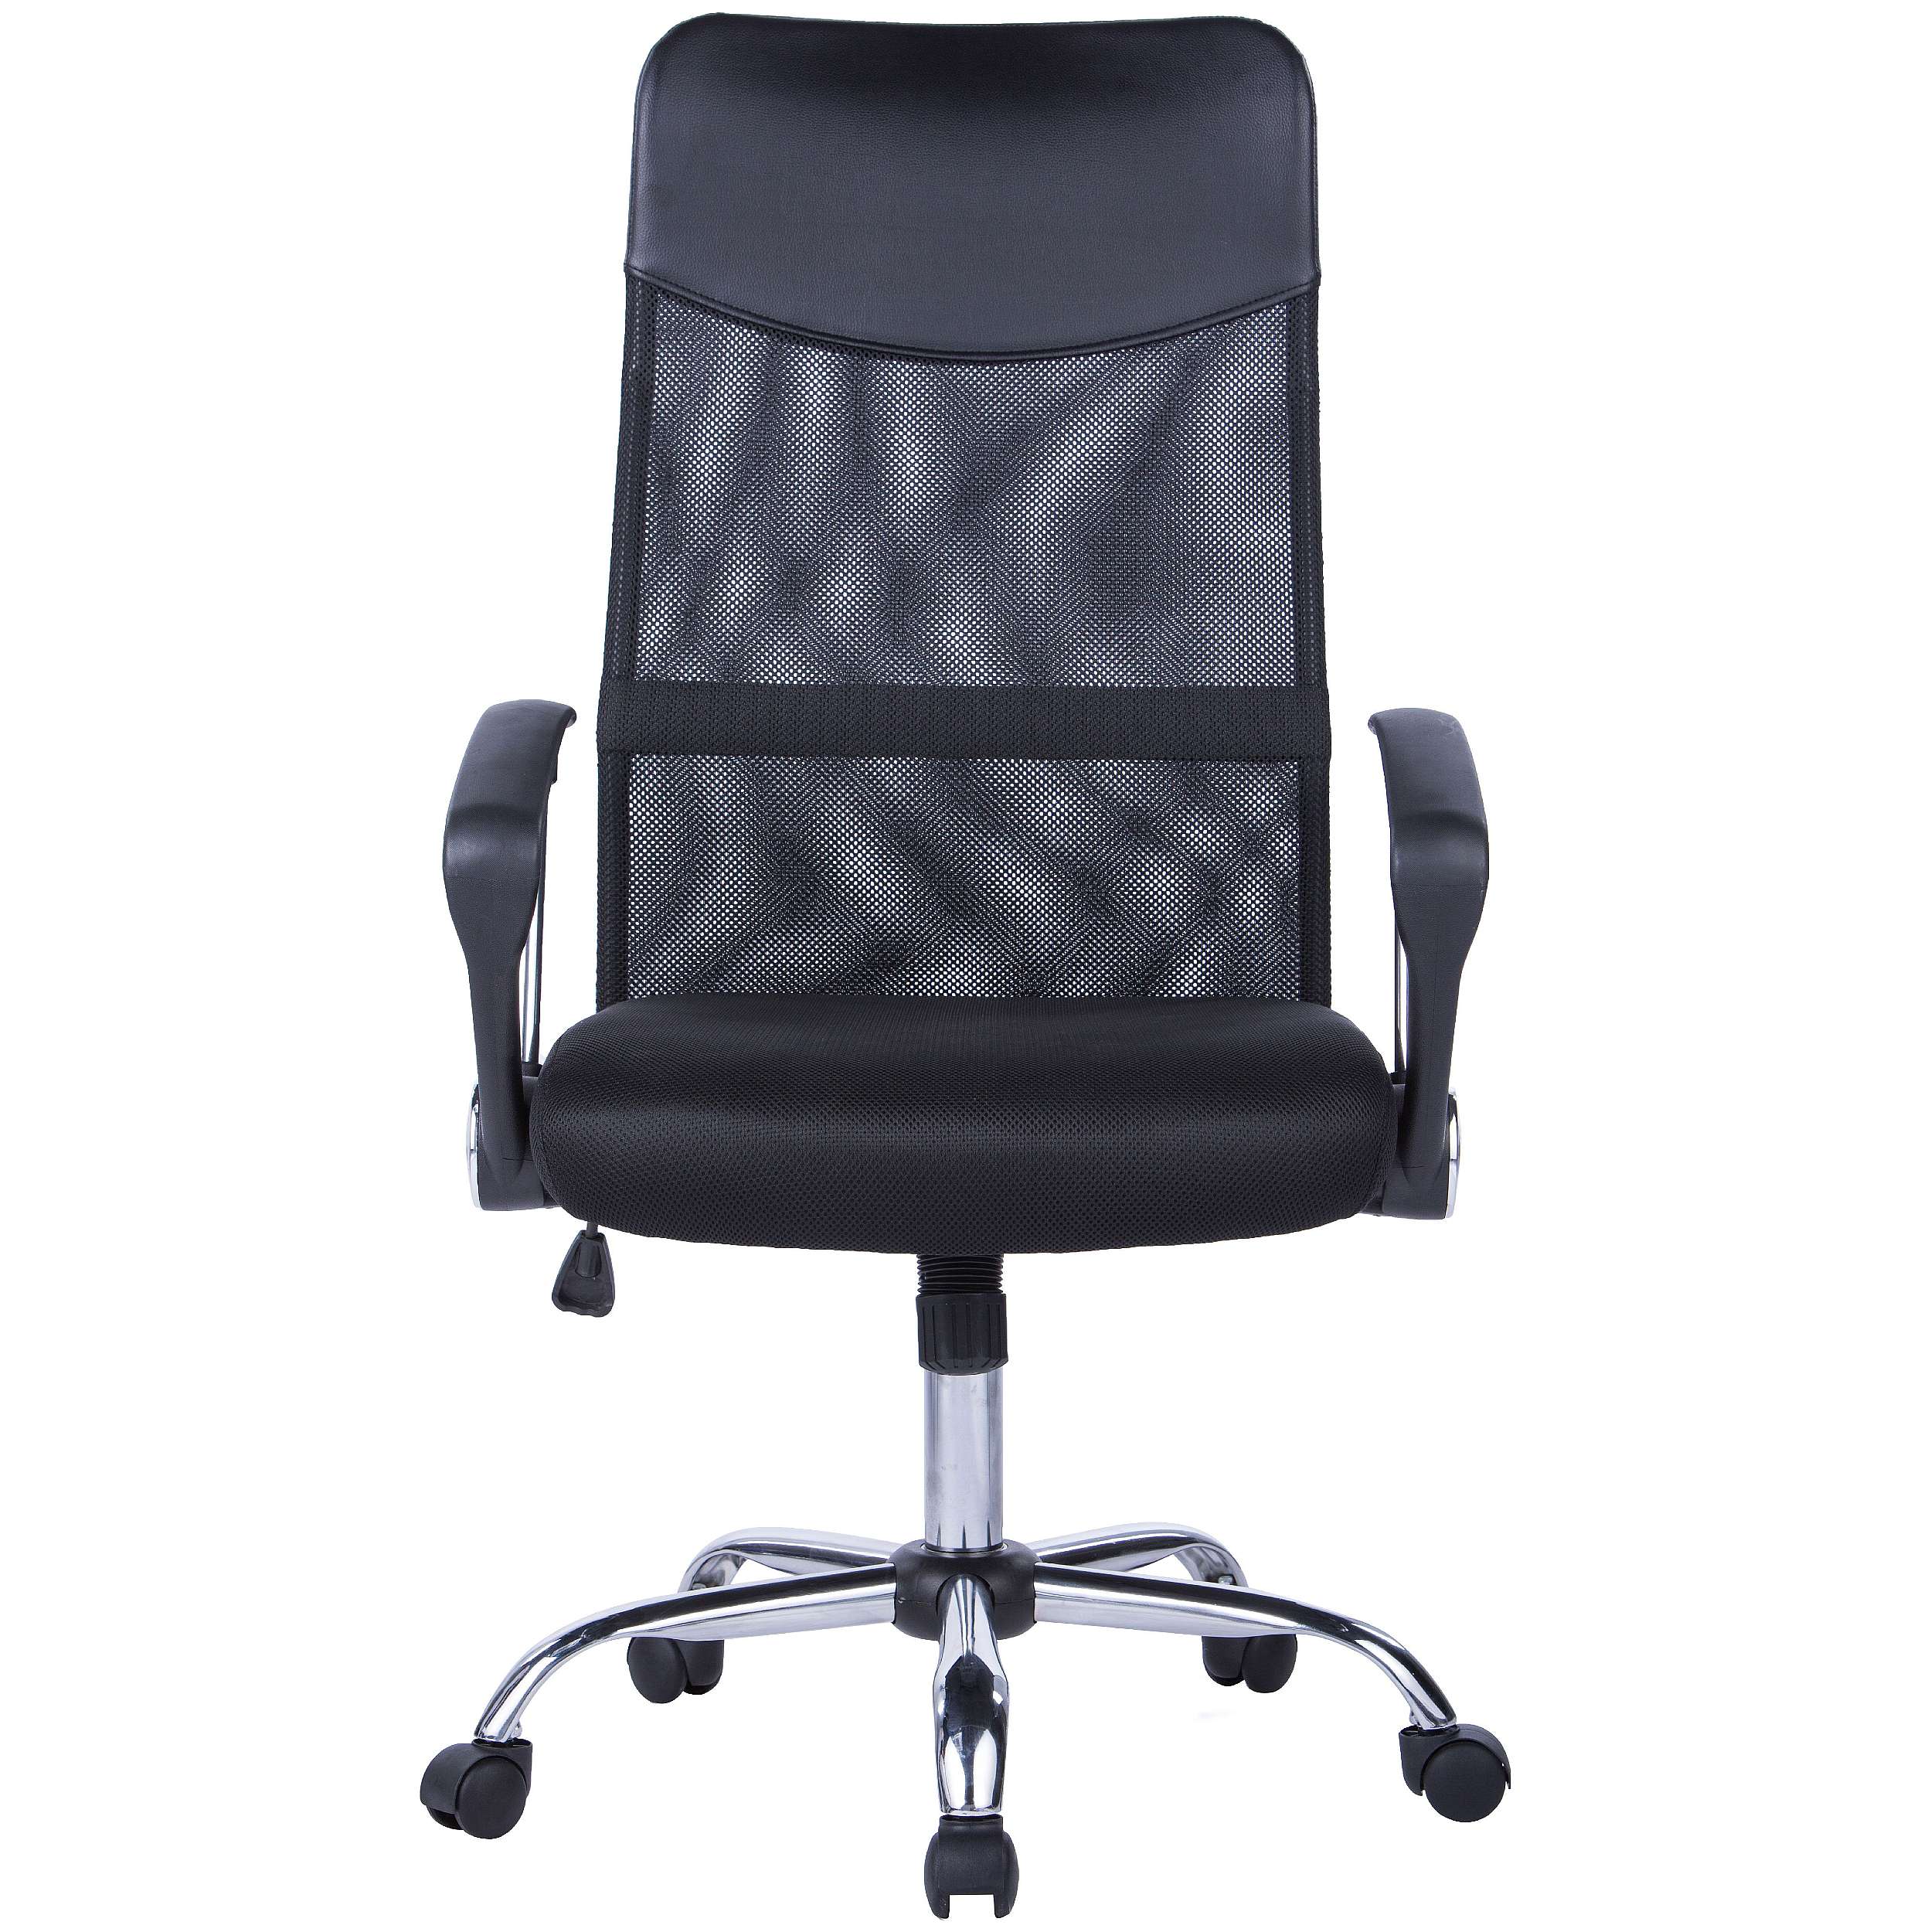 Carlos Mesh Office Chair from our Mesh Office Chairs range.